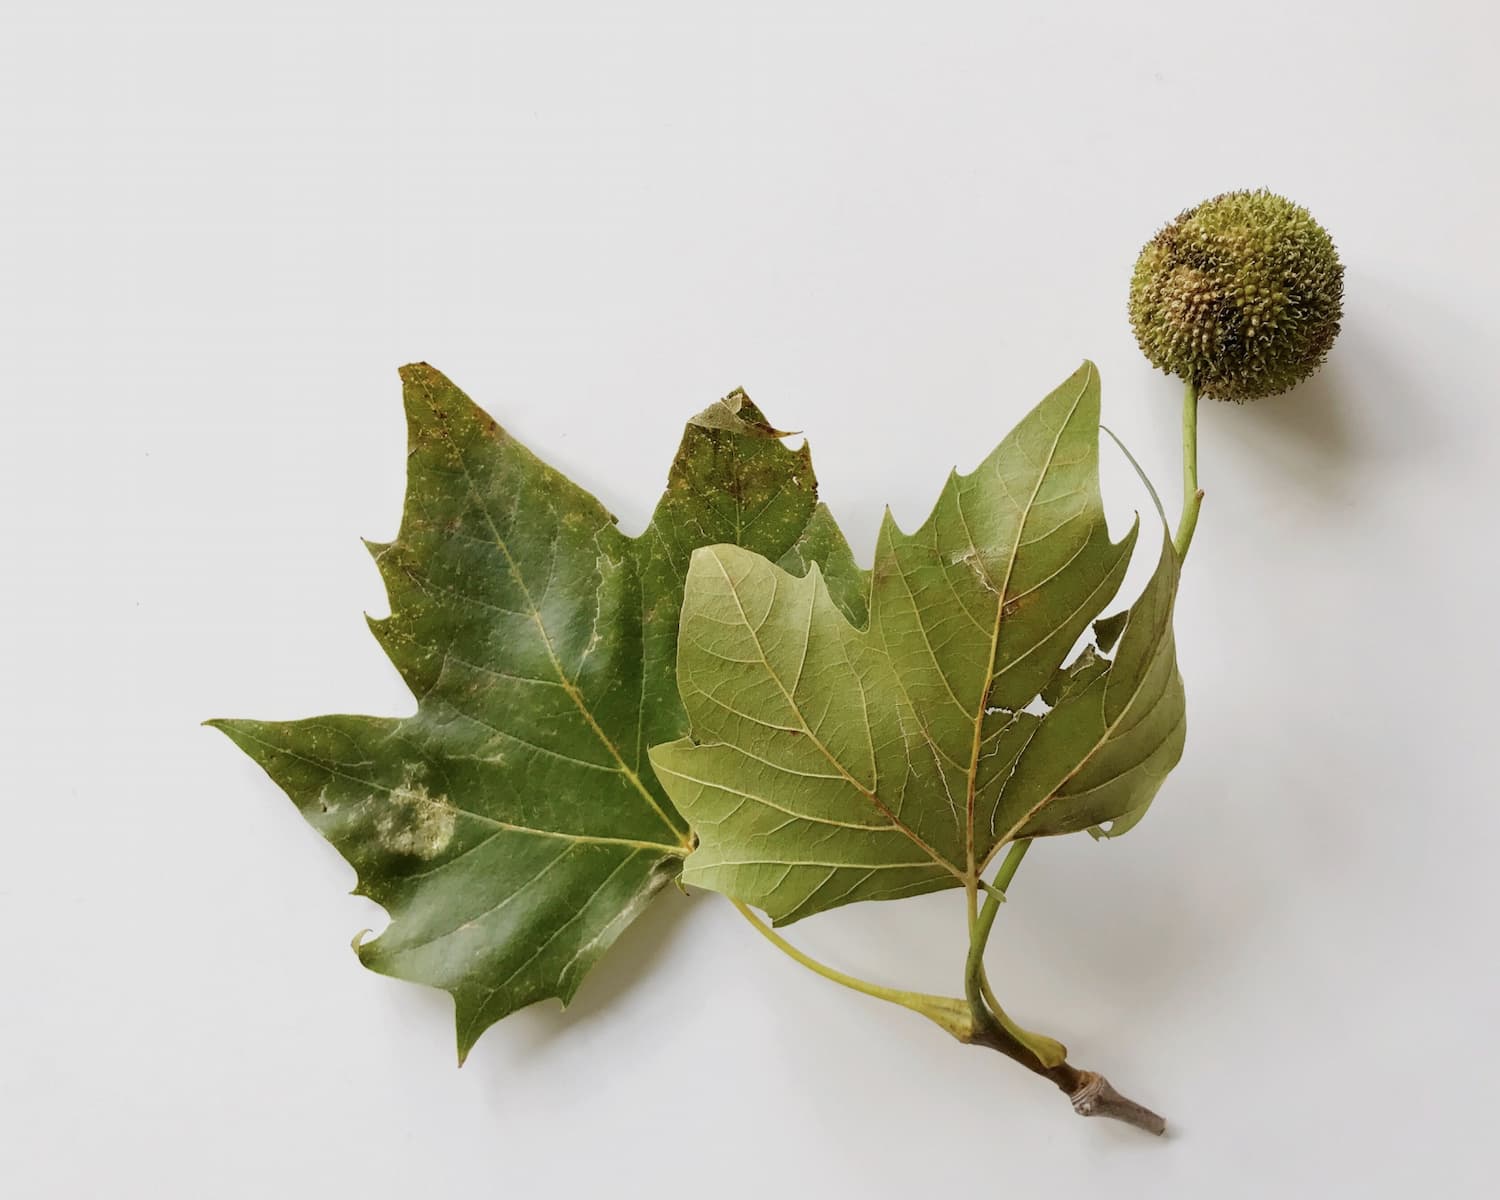 london plane tree leaves and seed pod